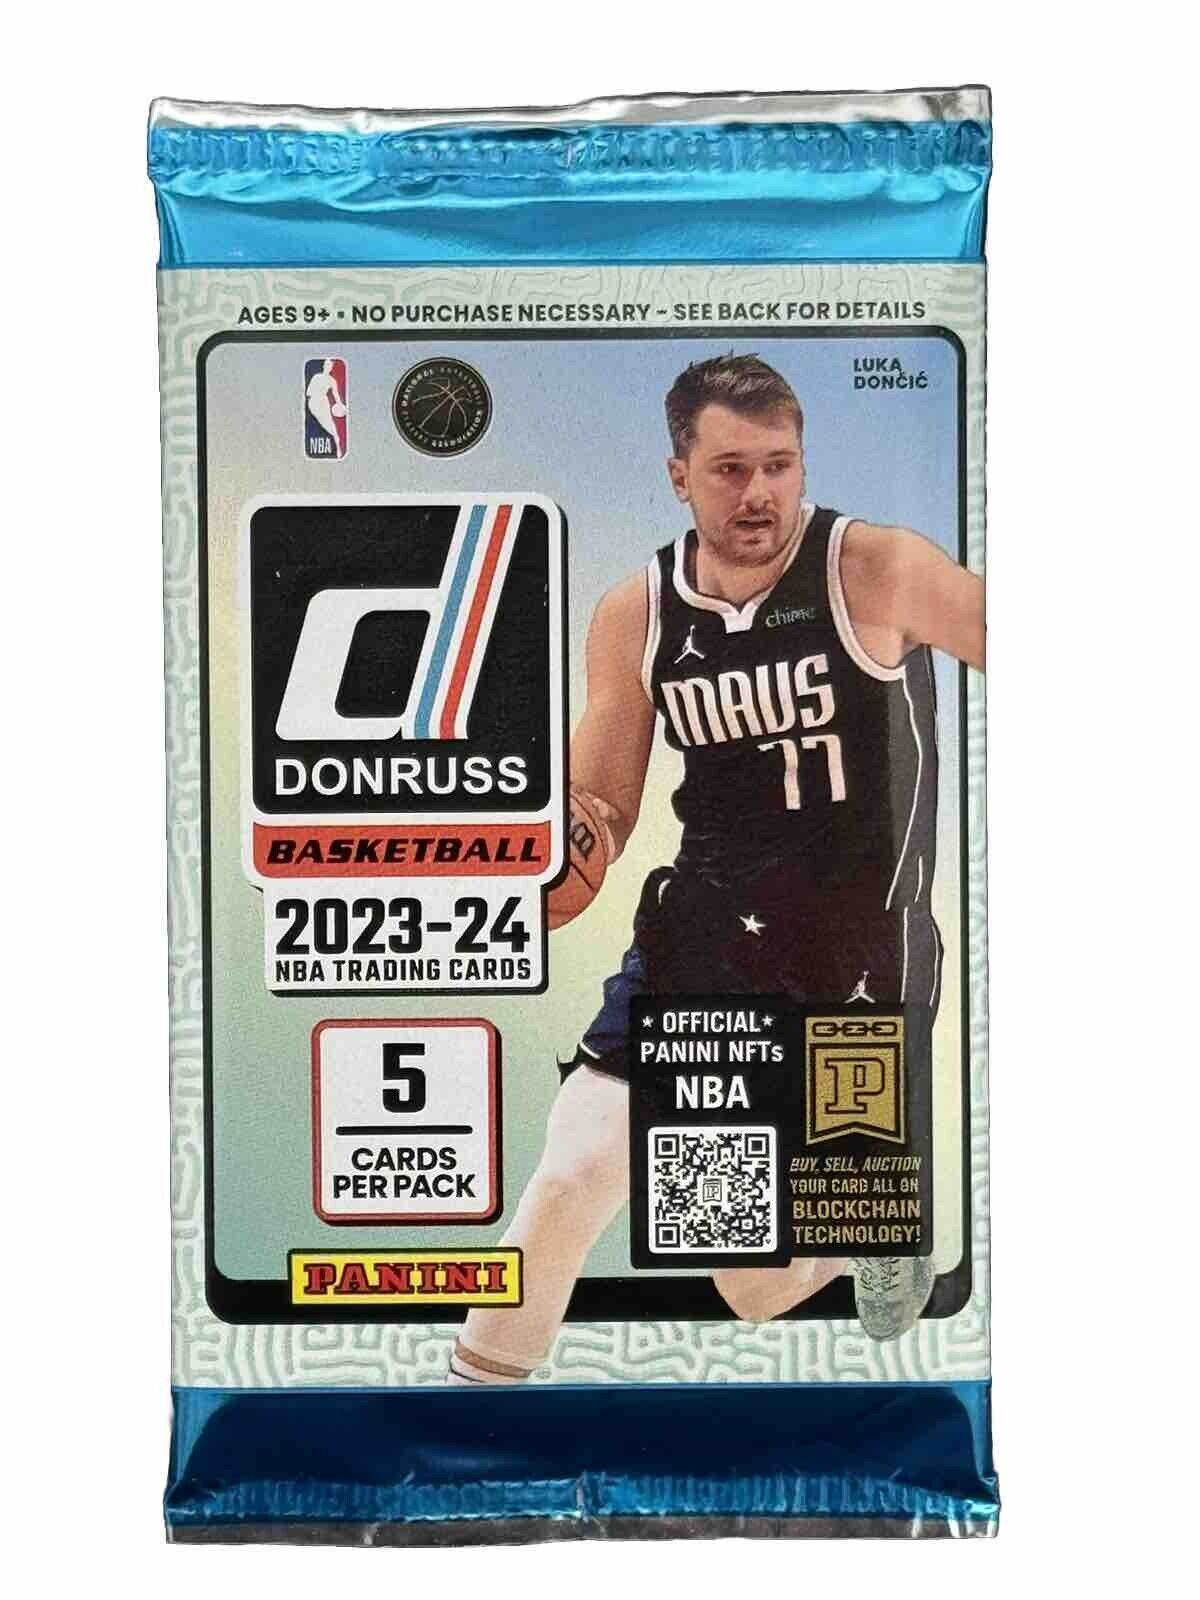 2023-24 NBA Panini Donruss Basketball Trading Cards Gravity Feed Pack (5 Trading Cards Per Pack)